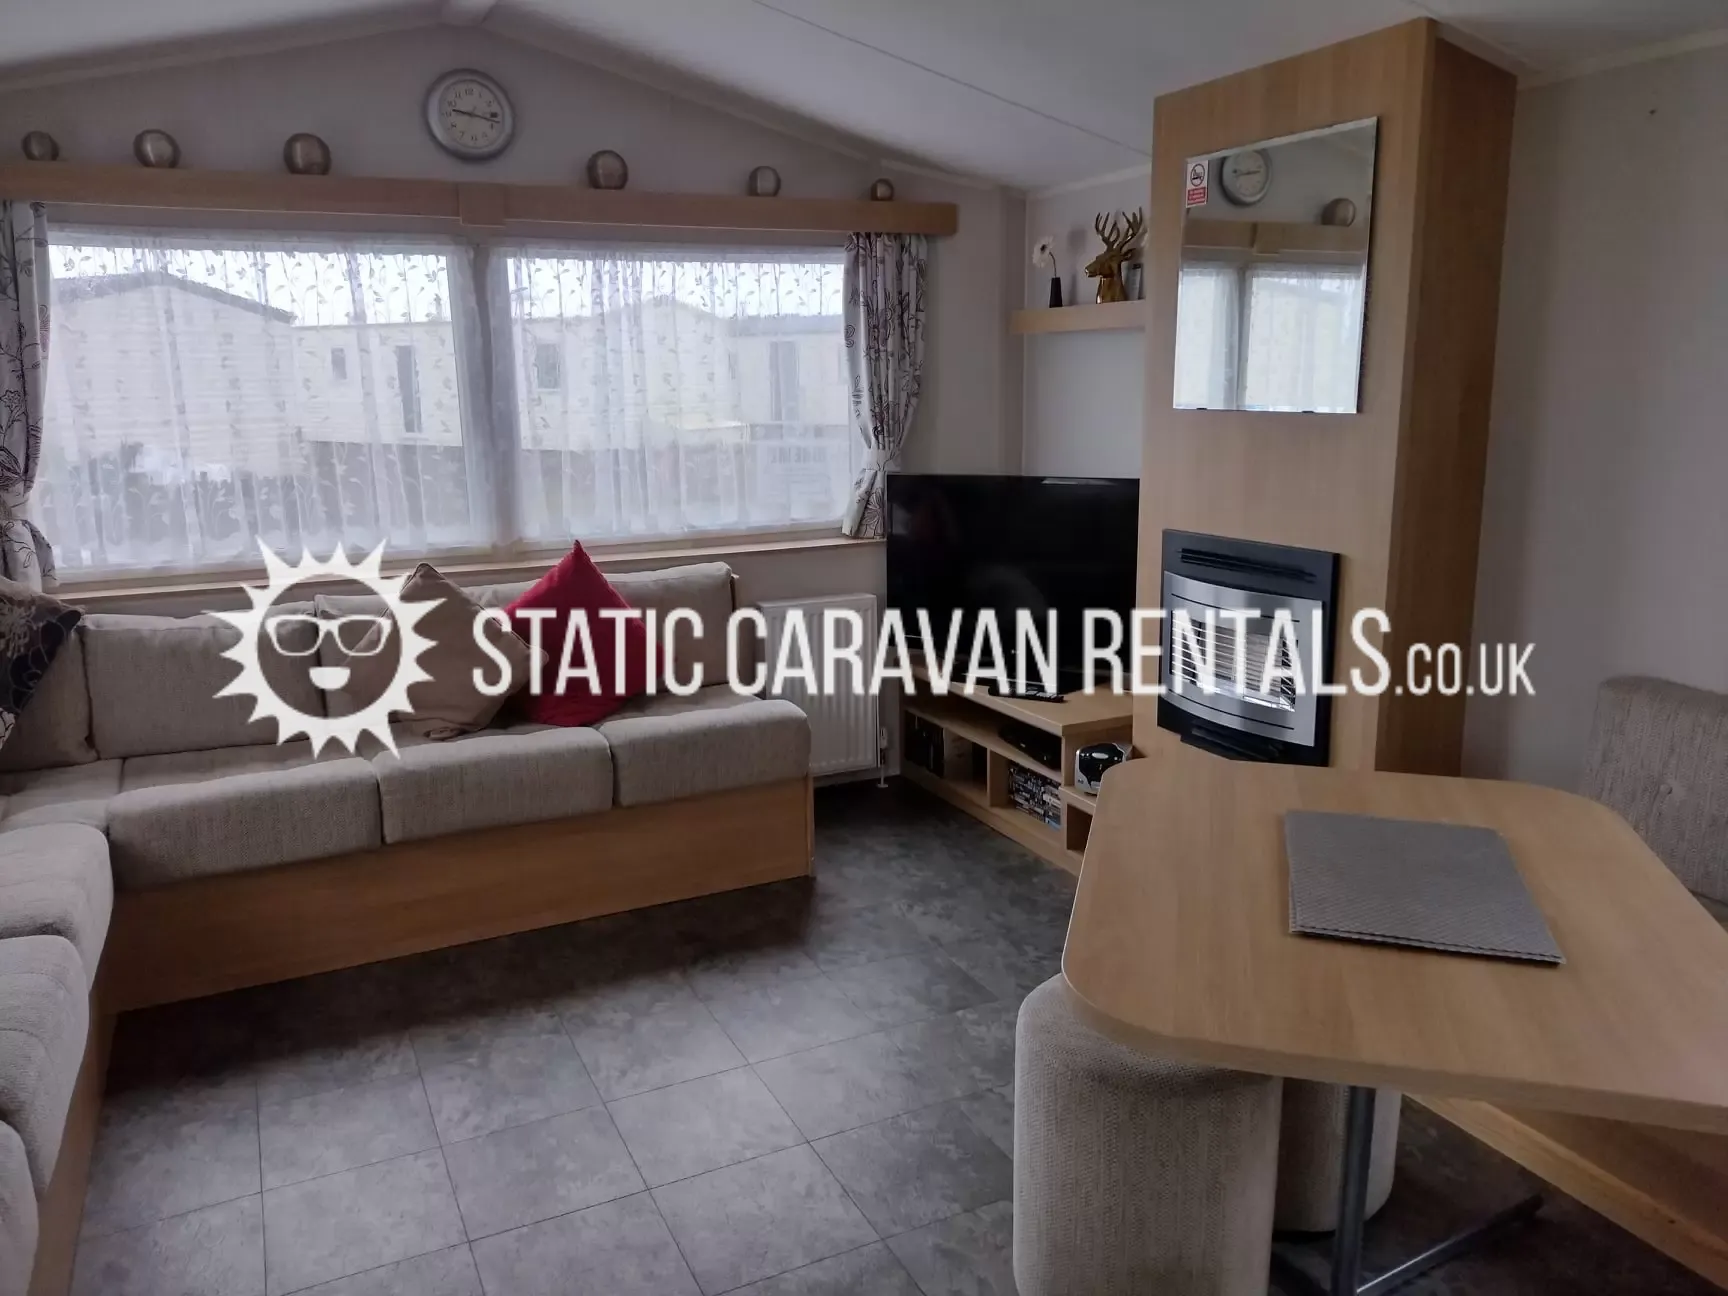 5 Static Private Carvan for Rent Holiday Resort Unity, Brean, Somerset, England